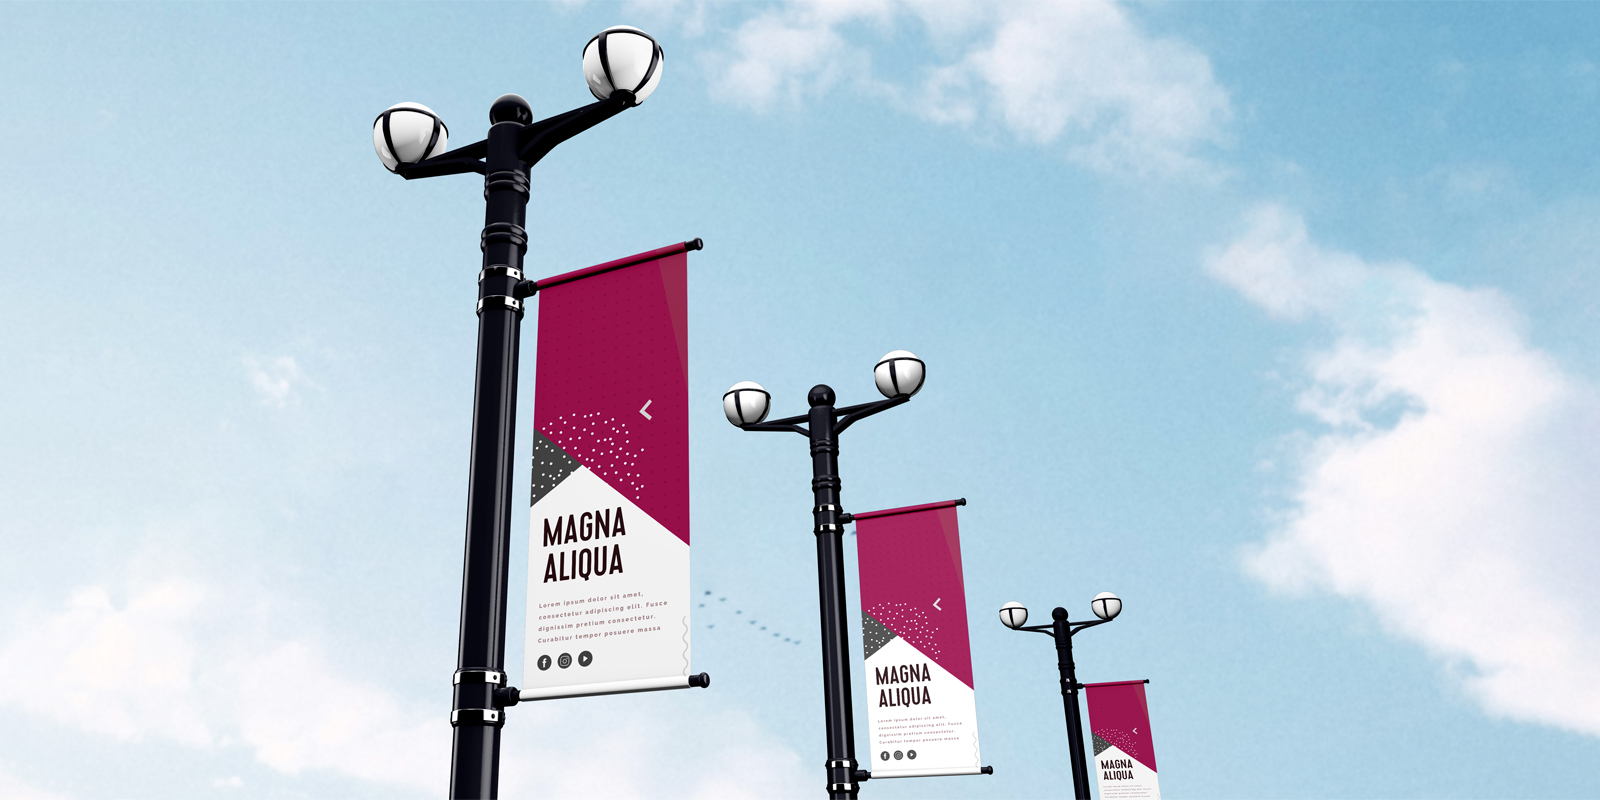 Pole banners in Mandurah - Print with Pagerr